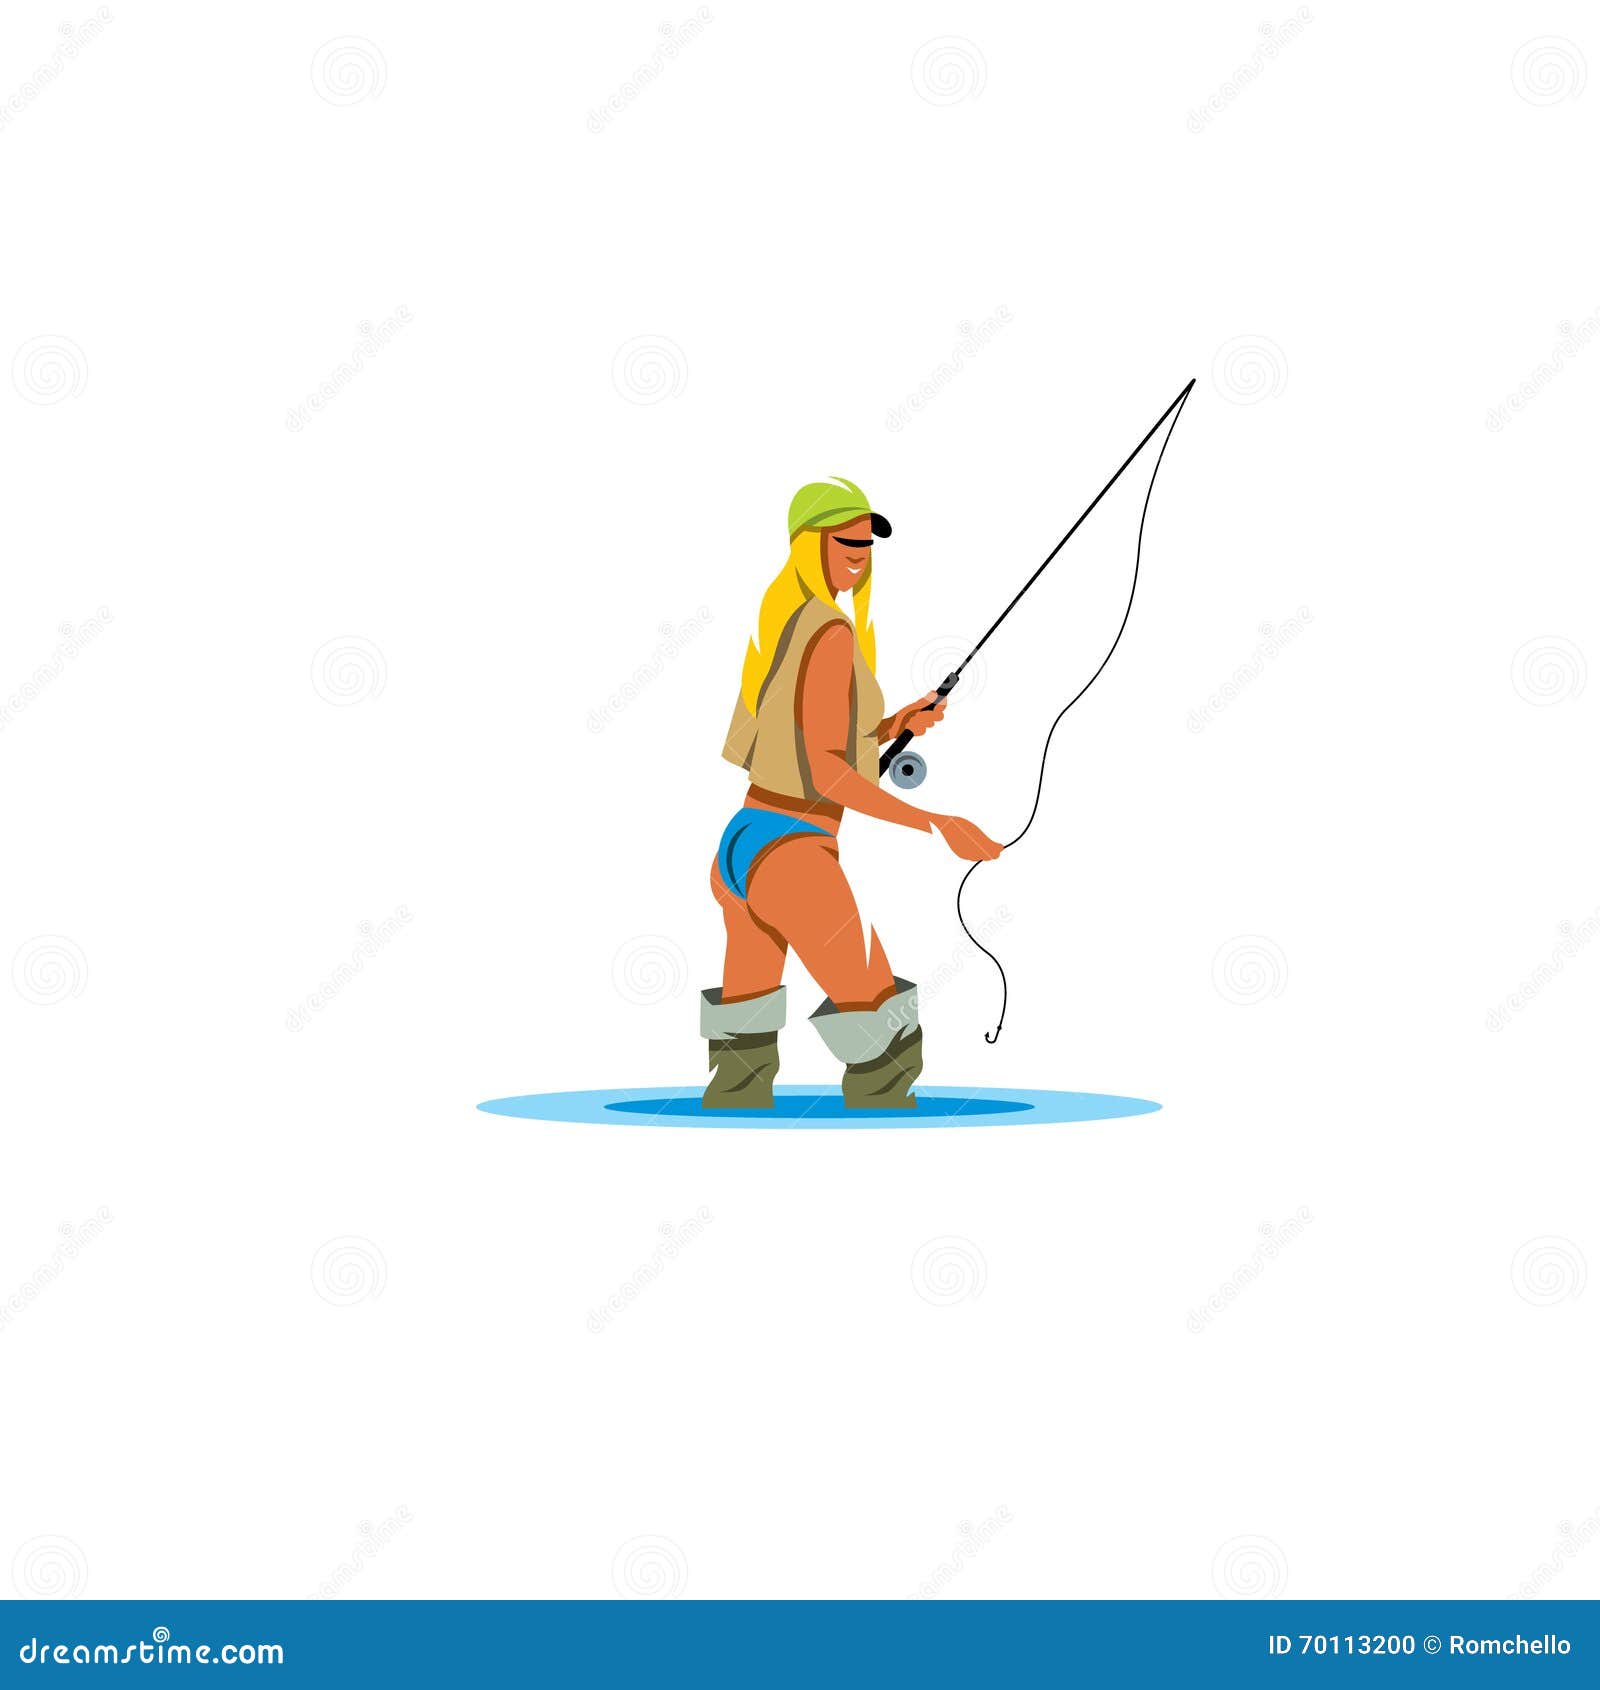 Download Woman Holding A Fishing Rod. Vector Illustration. Stock Vector - Image: 70113200